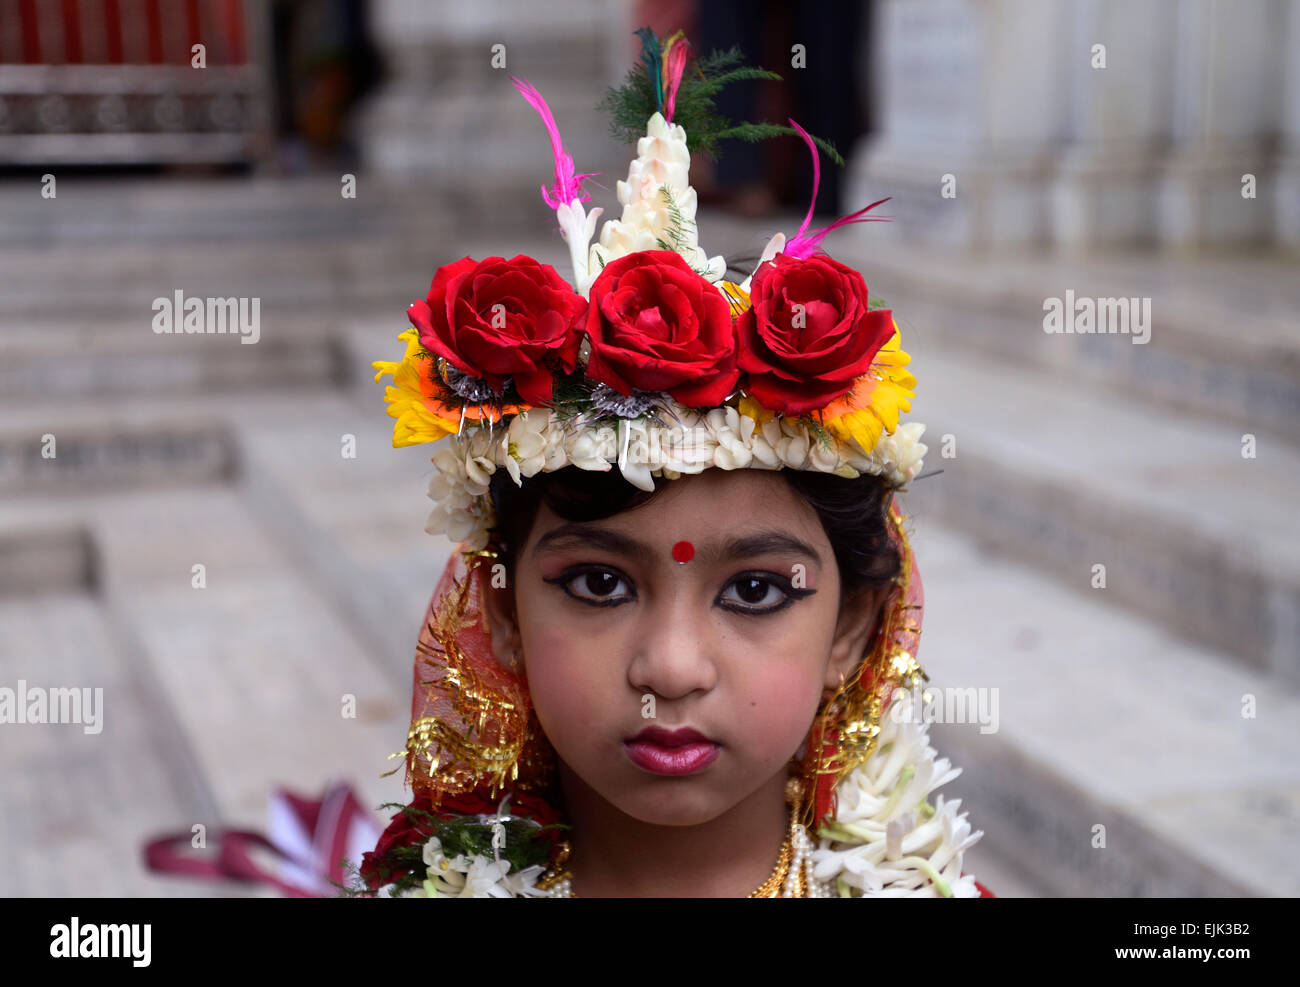 Kolkata, India. 30th Mar, 2015. There are 2000 Kumari been worshiped at Dakshinewar Ramkrishna Sangha Adyapeath, during the occasion of Basanti Puja or Annapurna Puja. Kumari Puja is a tradition of worshiping young pre-pubescent girls as manifestations of the female energy or Devi in Hindu religious tradition. Credit:  Saikat Paul/Pacific Press/Alamy Live News Stock Photo